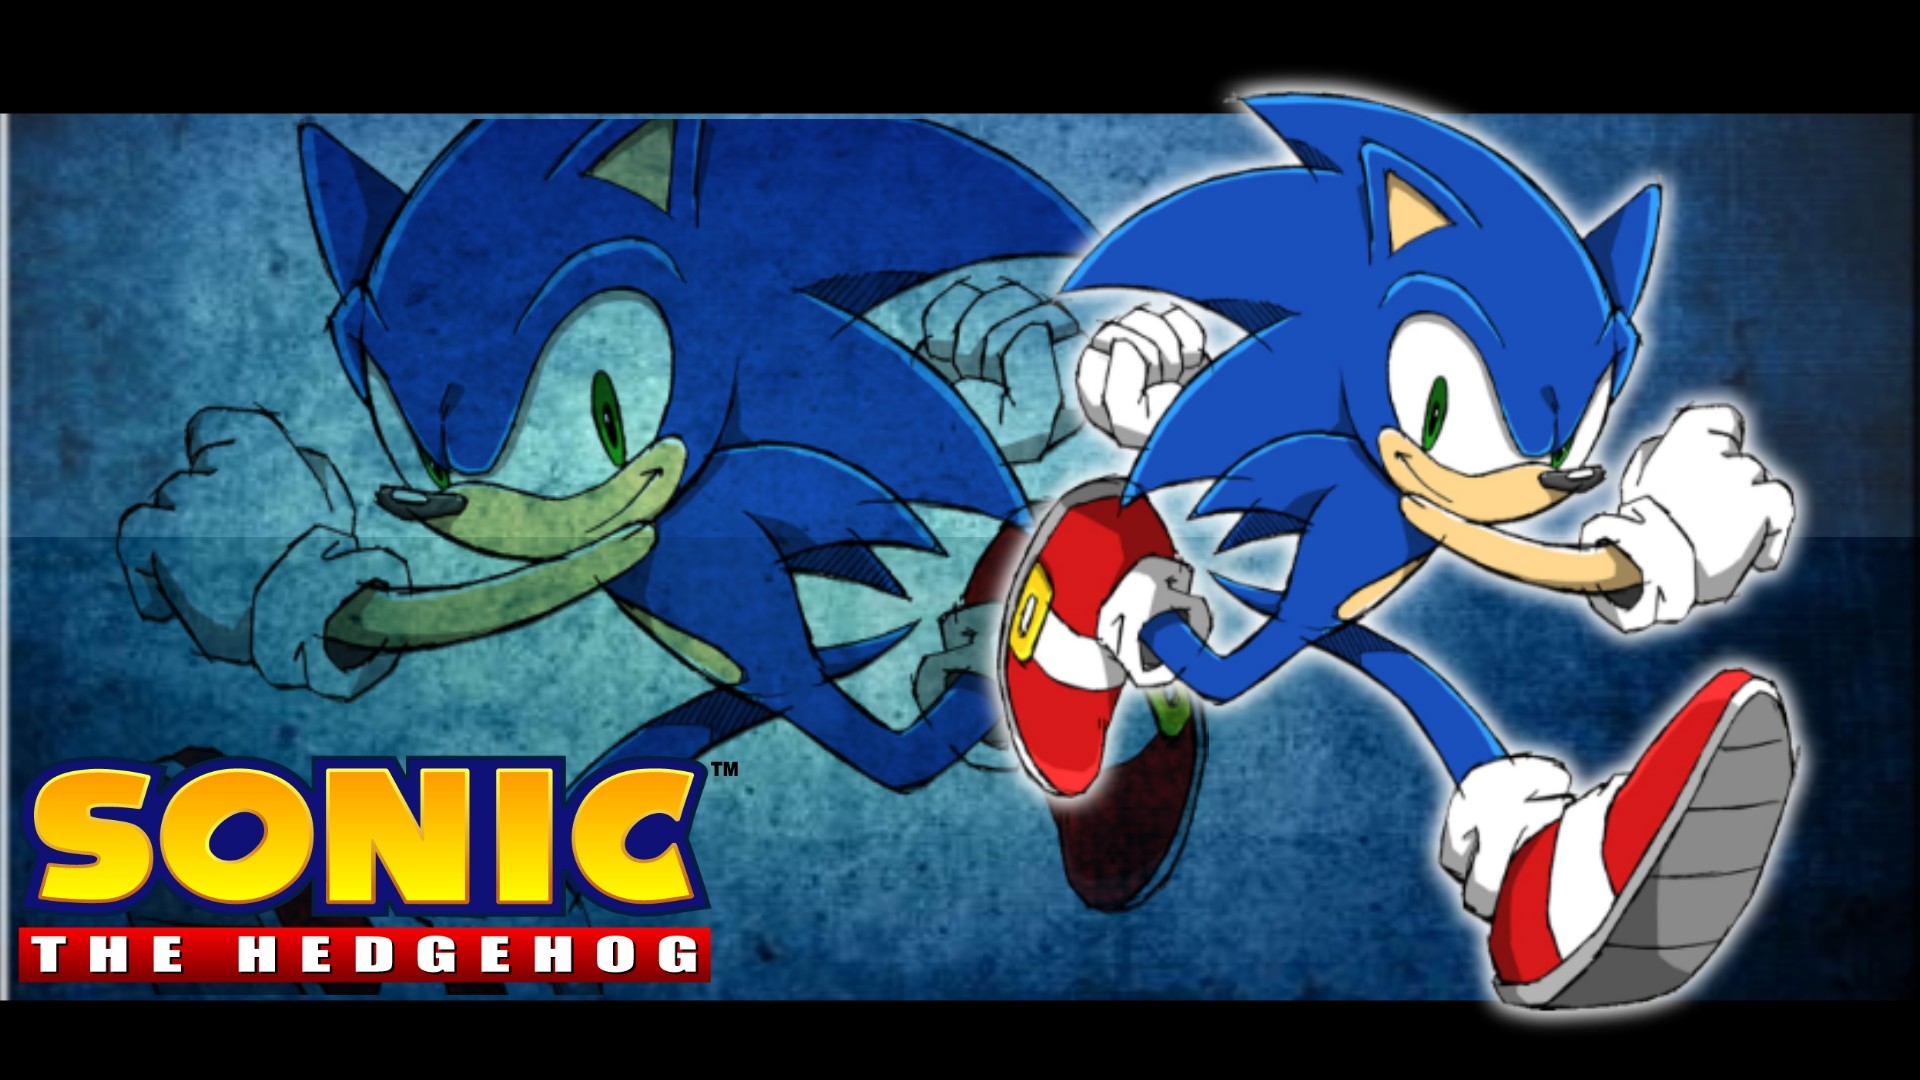 Download Sonic wallpapers for mobile phone free Sonic HD pictures